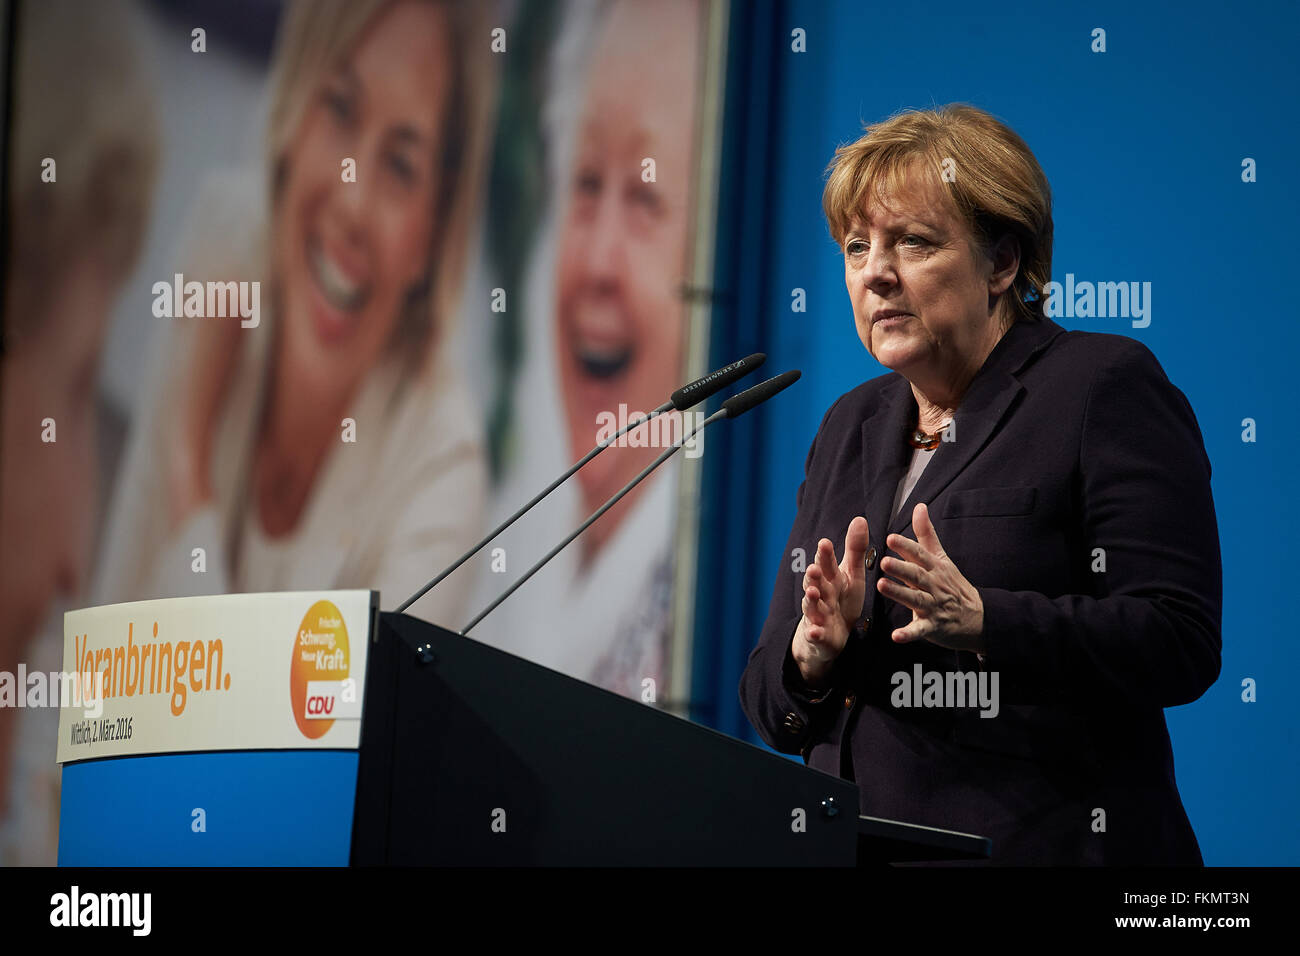 Chancellor Angela Merkel speaking at a campaign appearance on 02.03.2016, Wittlich, Rhineland-Palatinate, Germany Stock Photo